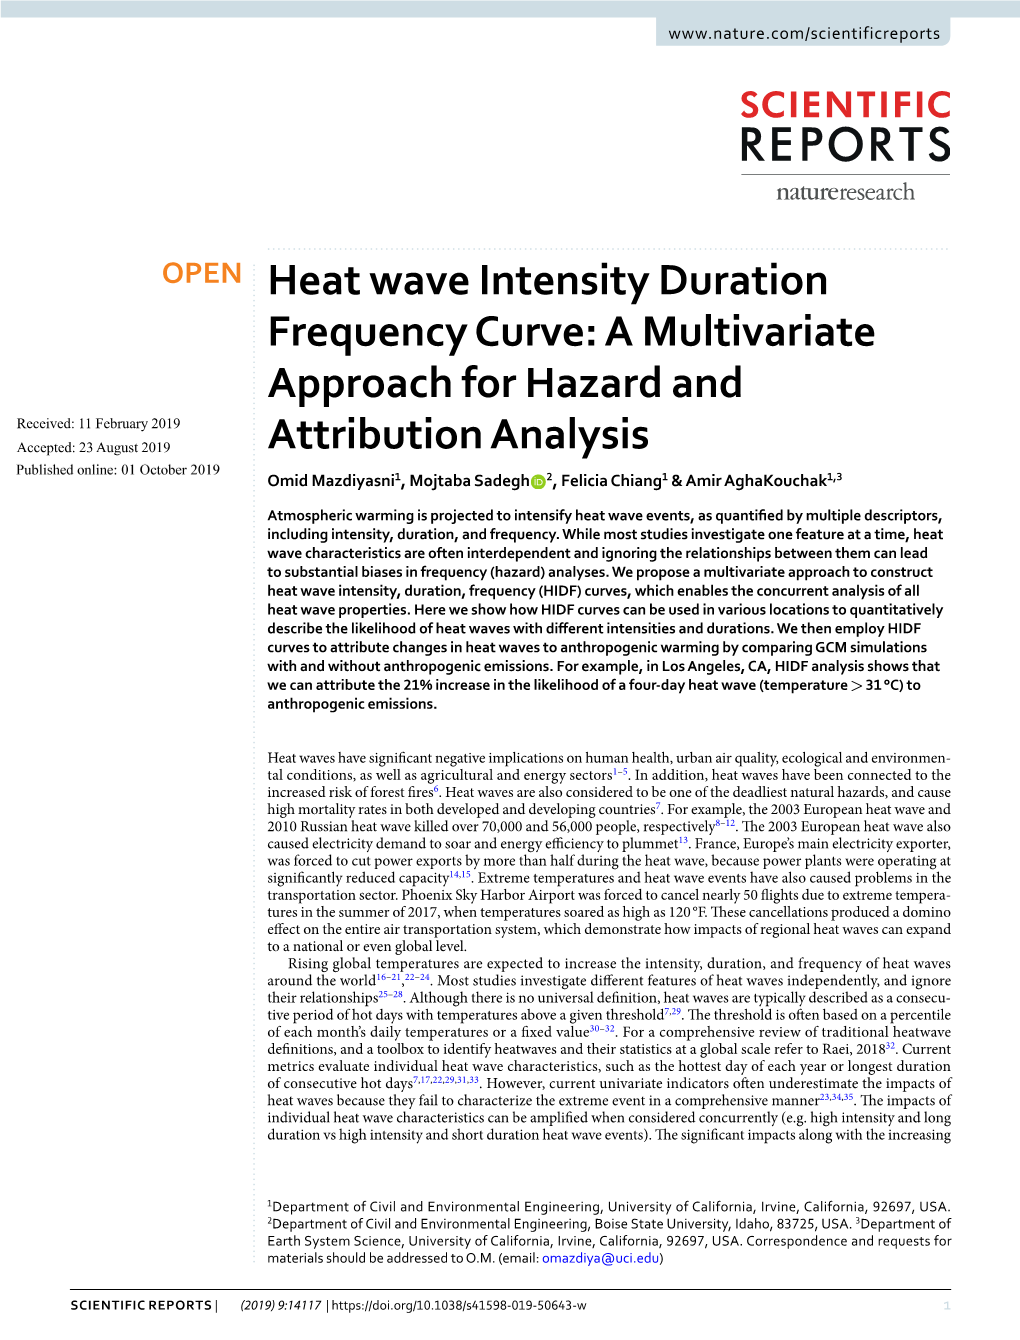 Heat Wave Intensity Duration Frequency